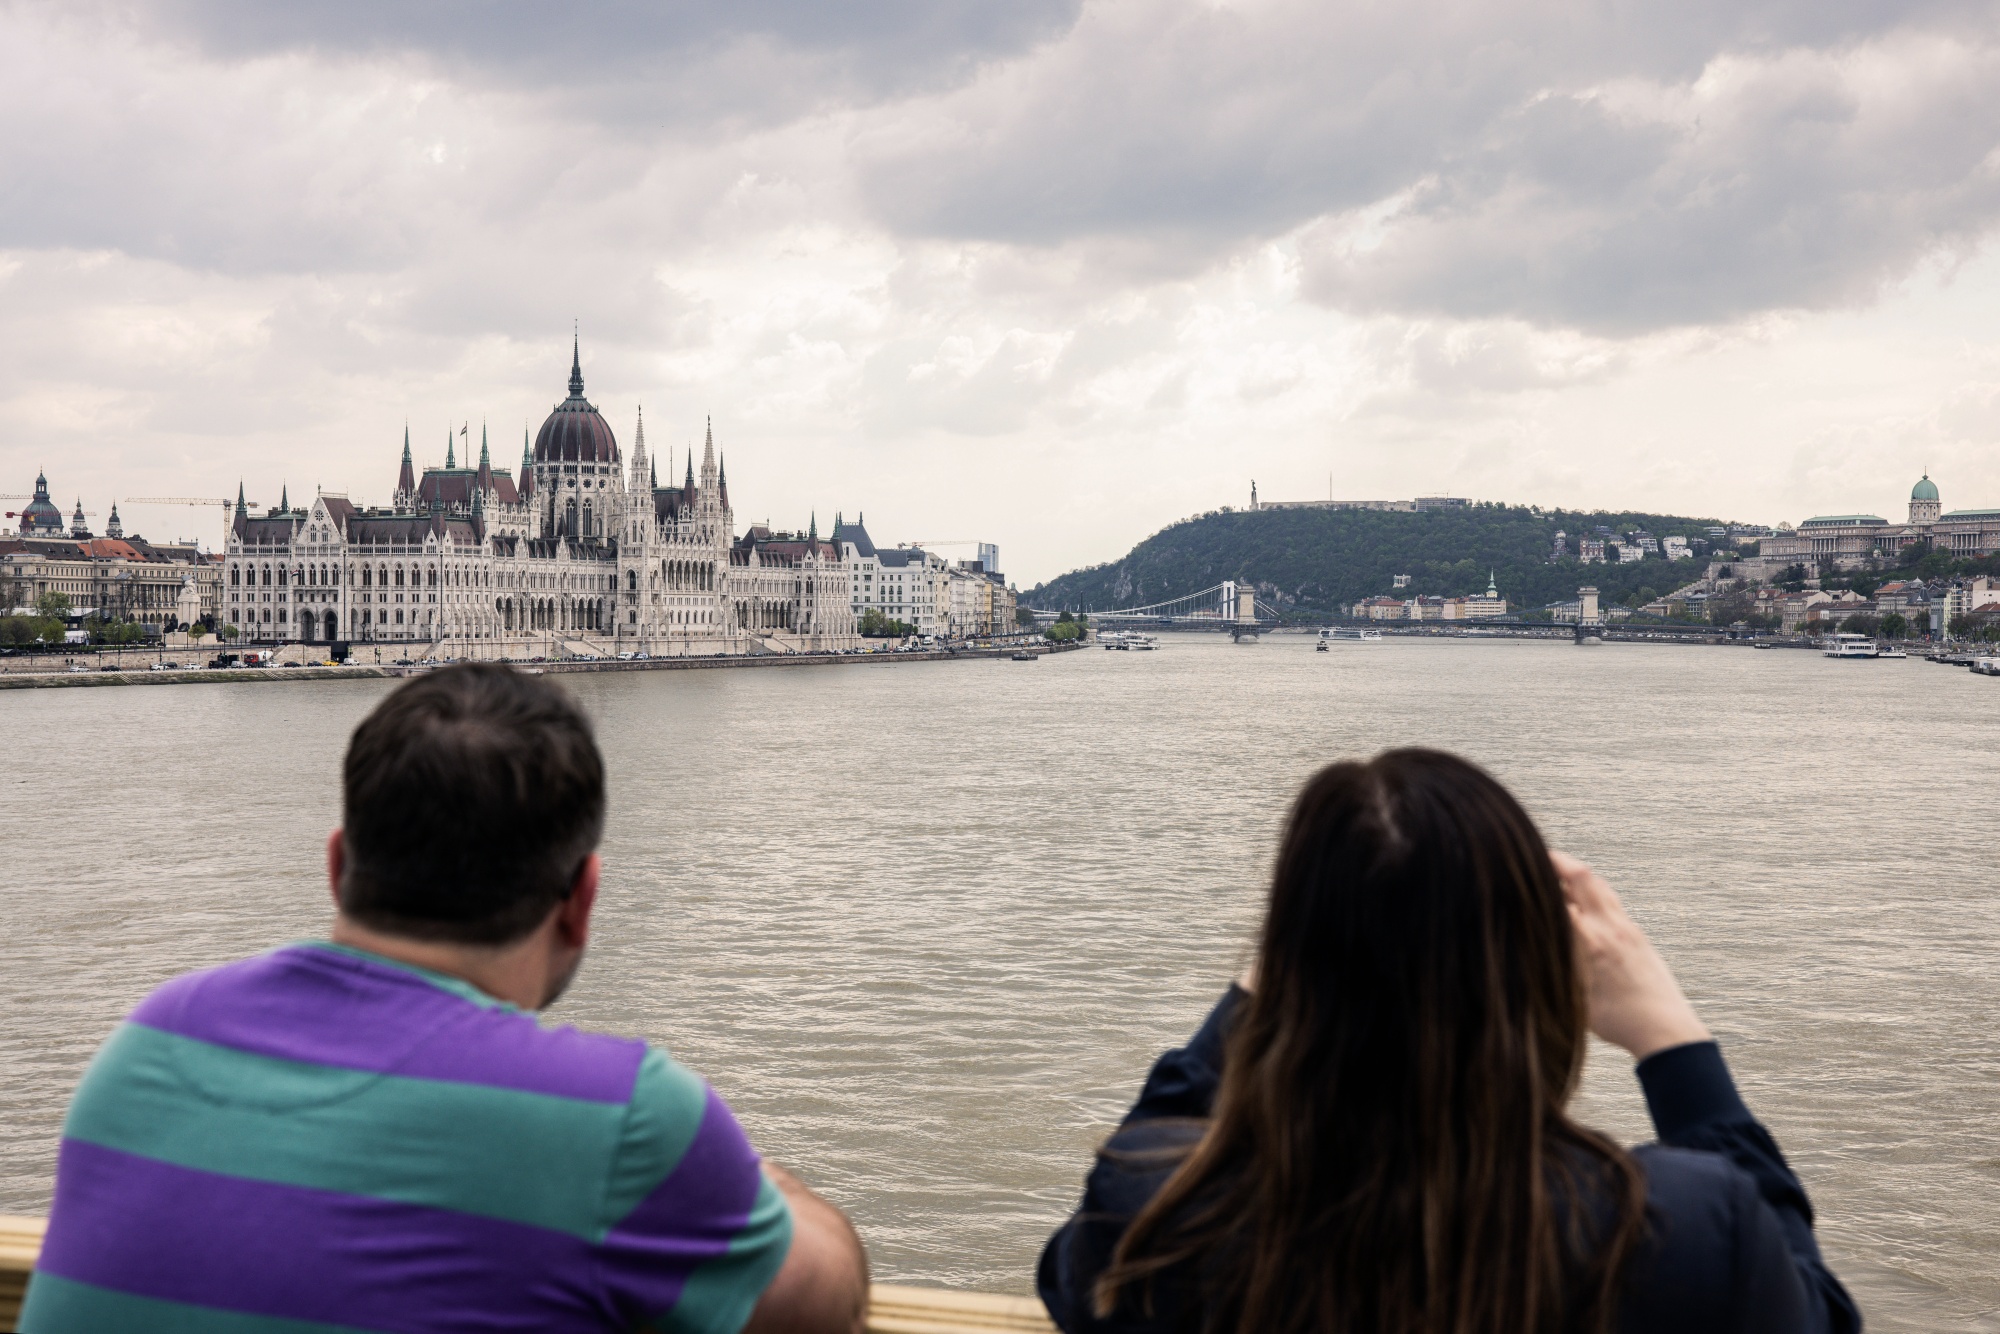 Tourists look across the River Danube at the Hungarian Parliament building in Budapest, Hungary.